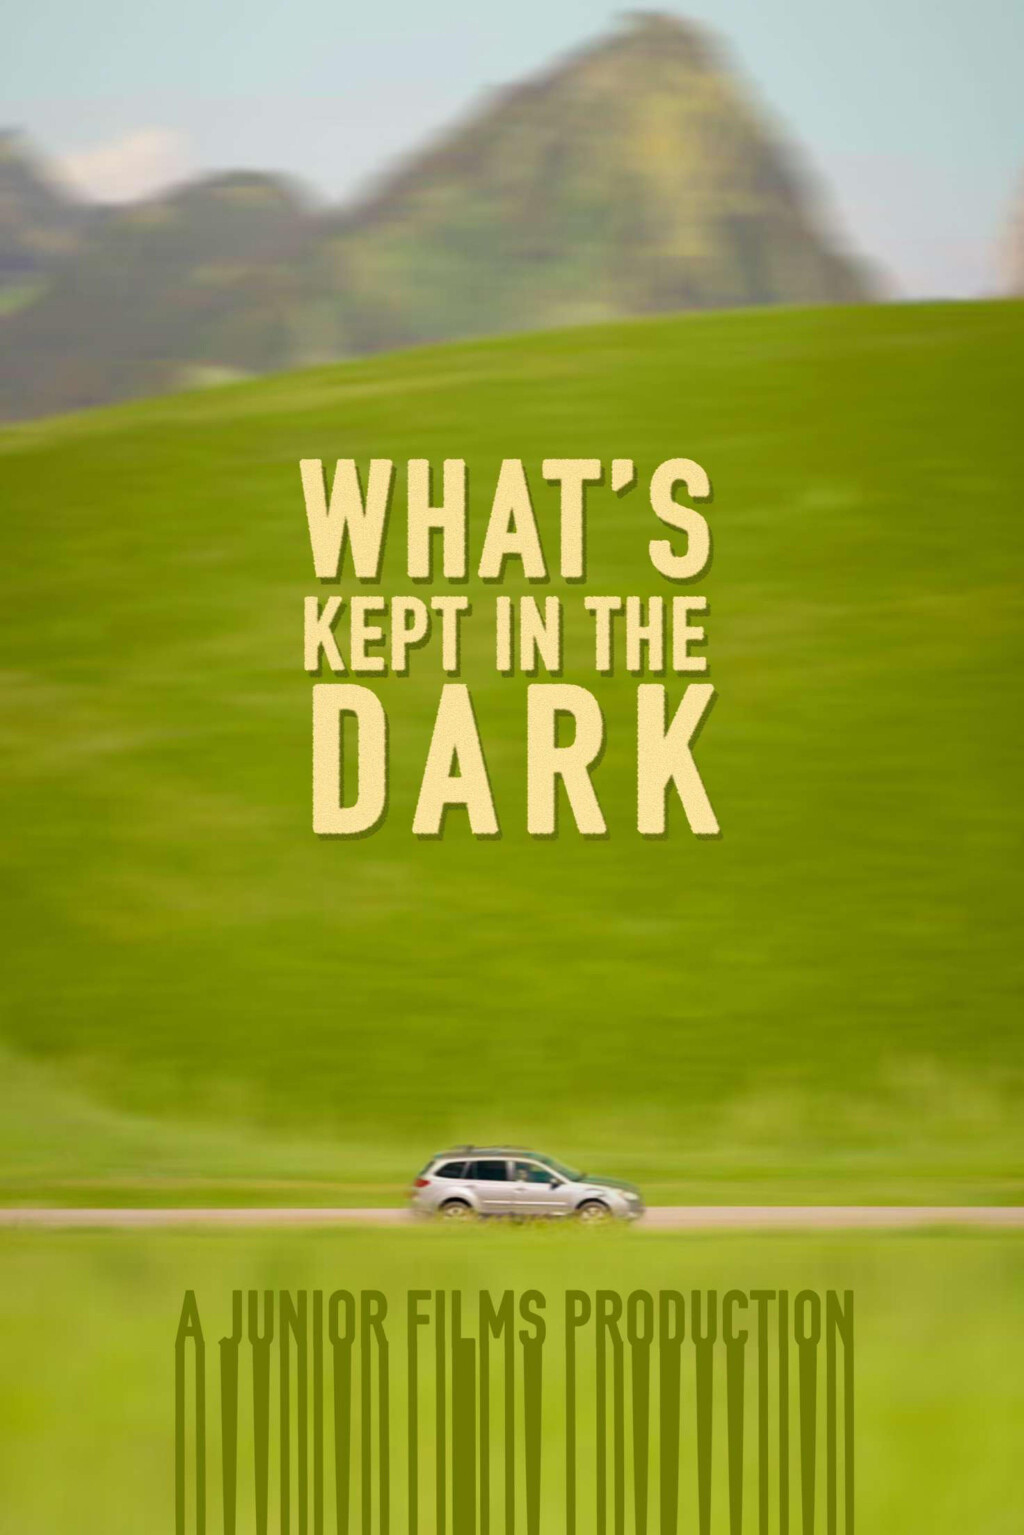 Filmposter for What's Kept in the Dark